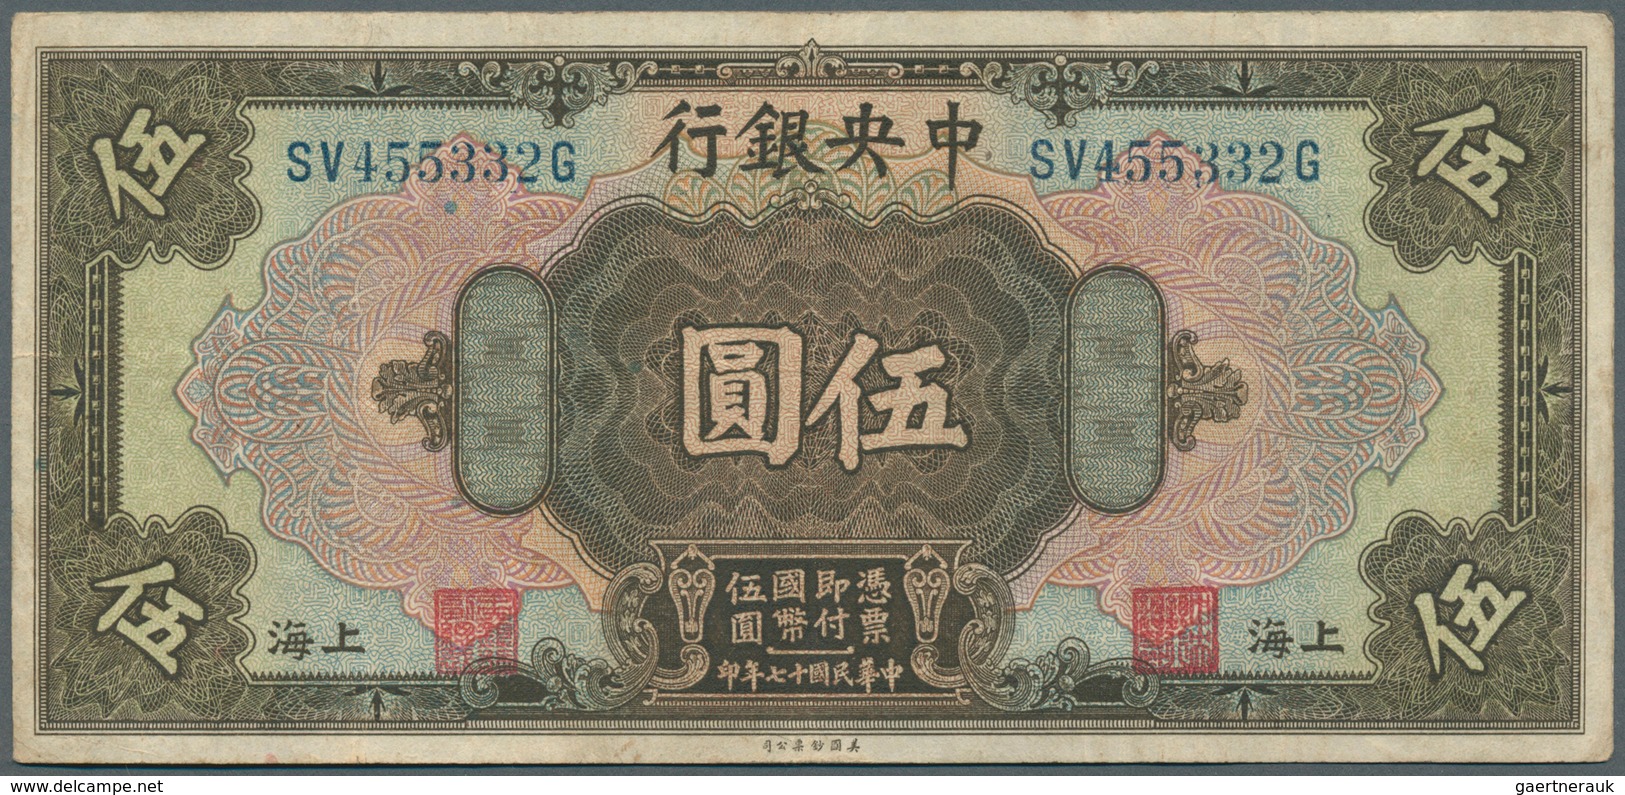 01292 China: 5 Dollars 1928 The Central Bank Of China P. 196d, Used With Several Folds But Still Strong Pa - Chine